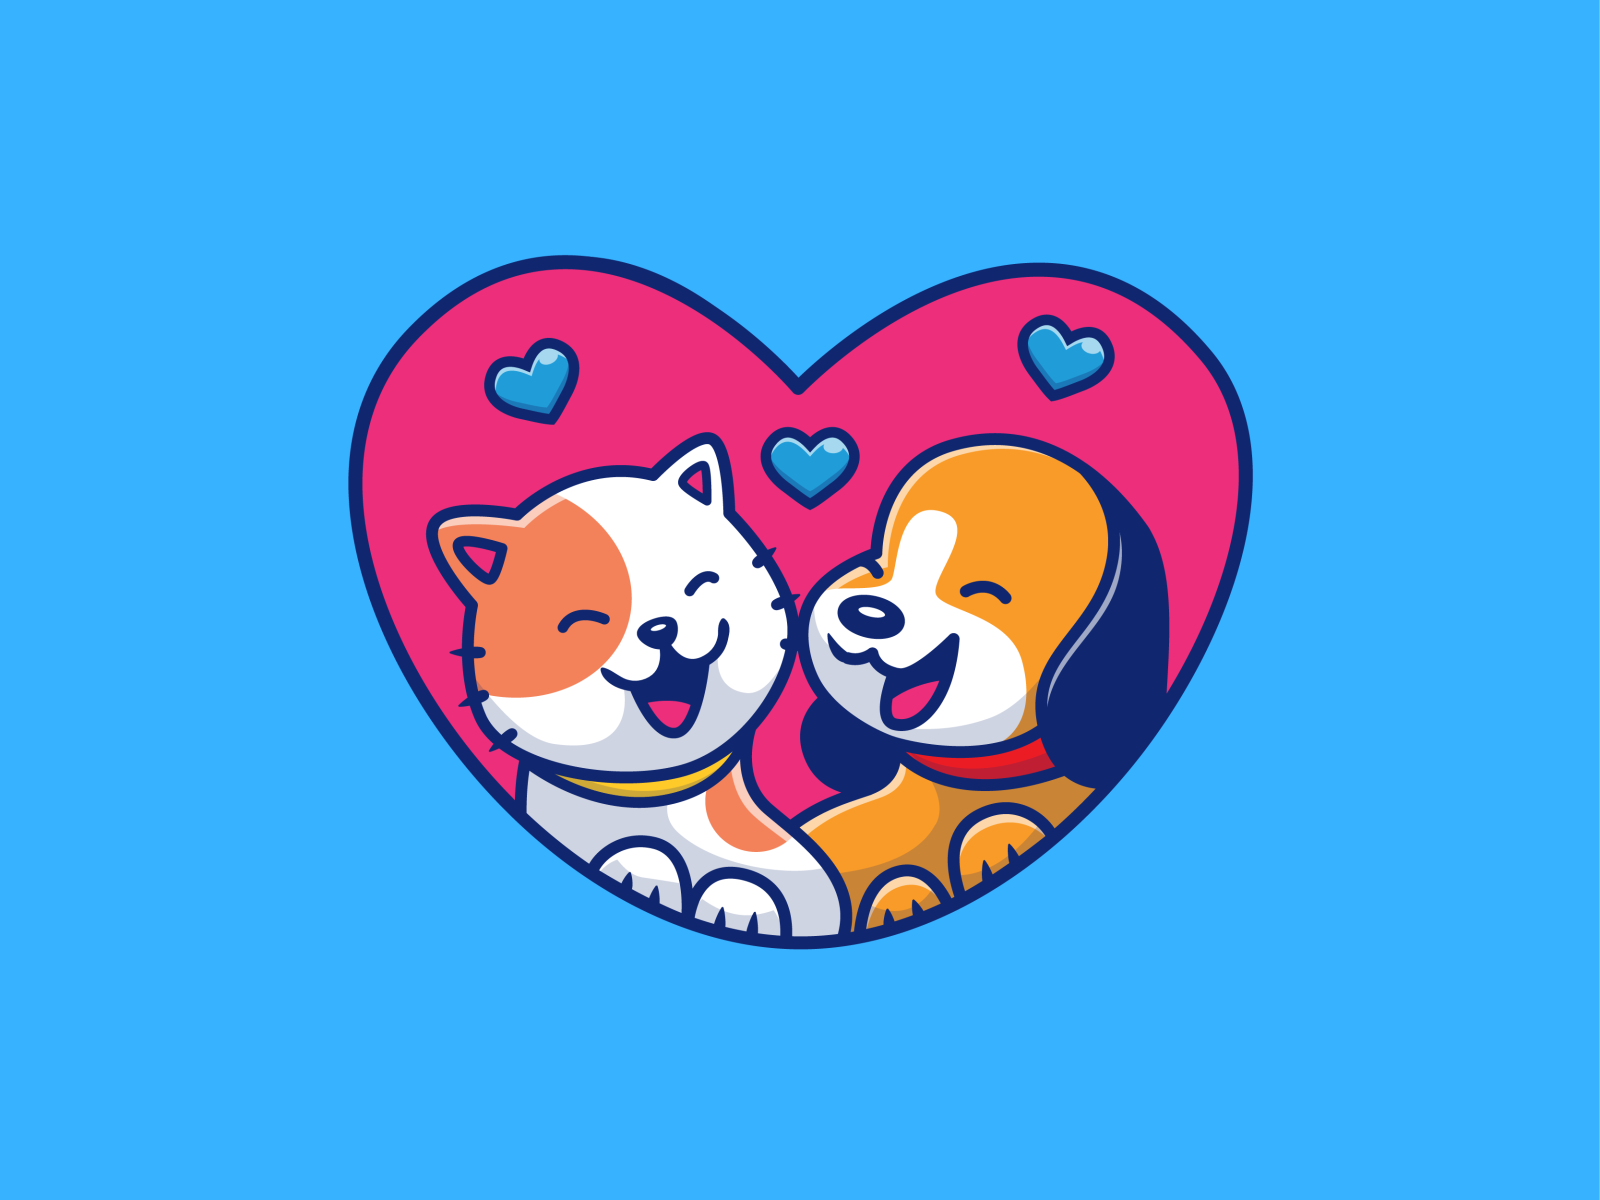 cat 💙 dog by catalyst on Dribbble